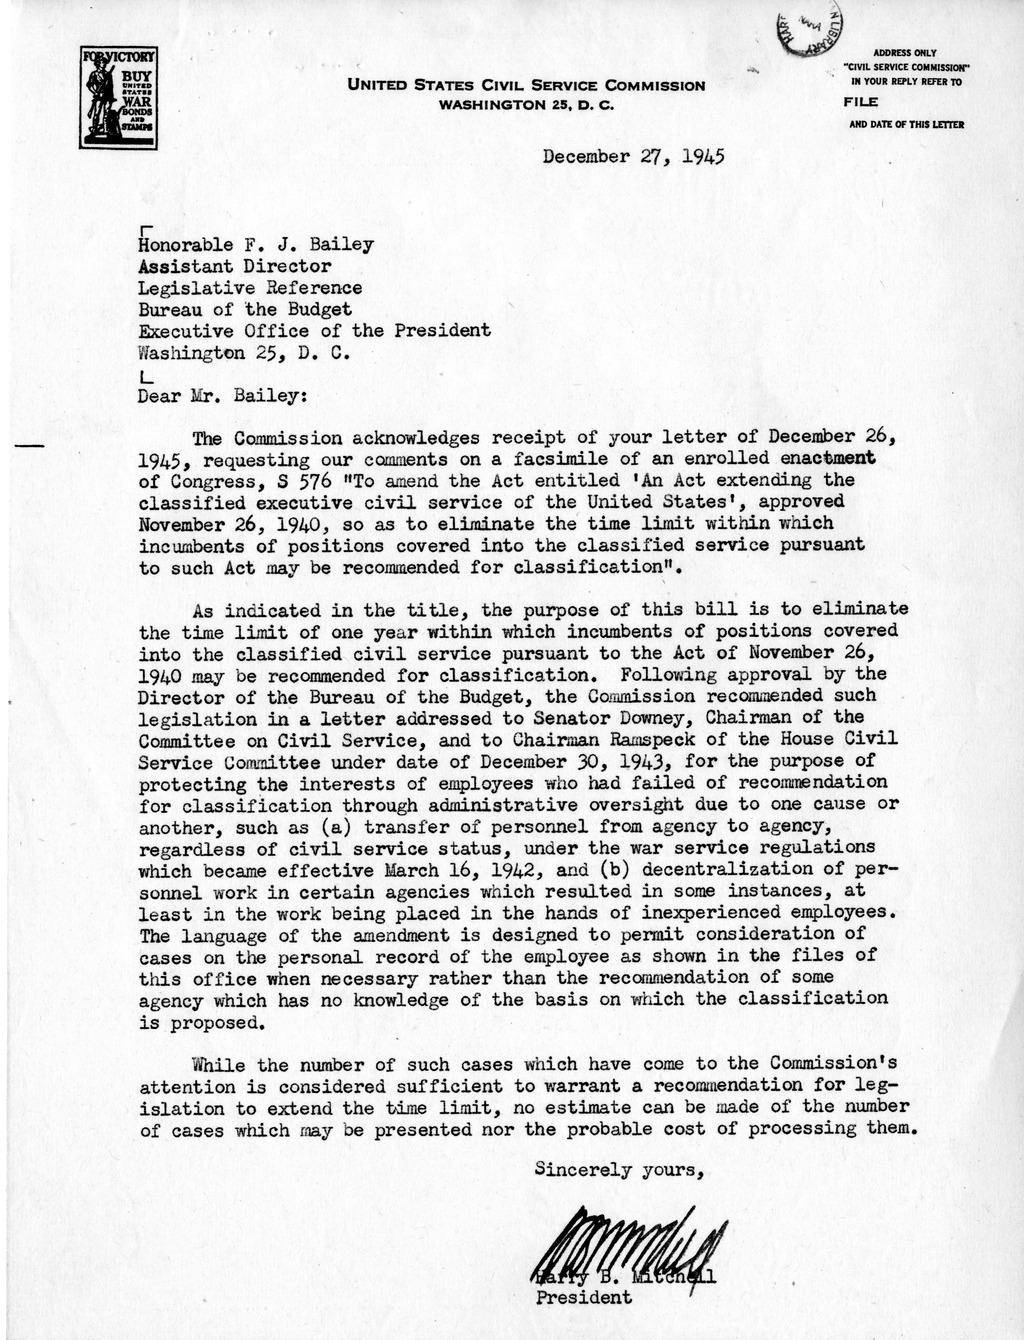 Memorandum from Frederick J. Bailey to M. C. Latta, S. 576, To Amend an Act Extending the Classified Executive Civil Service of the United States, Approved November 26, 1940, so as to Eliminate the Time Limit Within Which Incumbents of Positions Covered Into the Classified Service Pursuant to Such Act May be Recommended for Classification, with Attachments